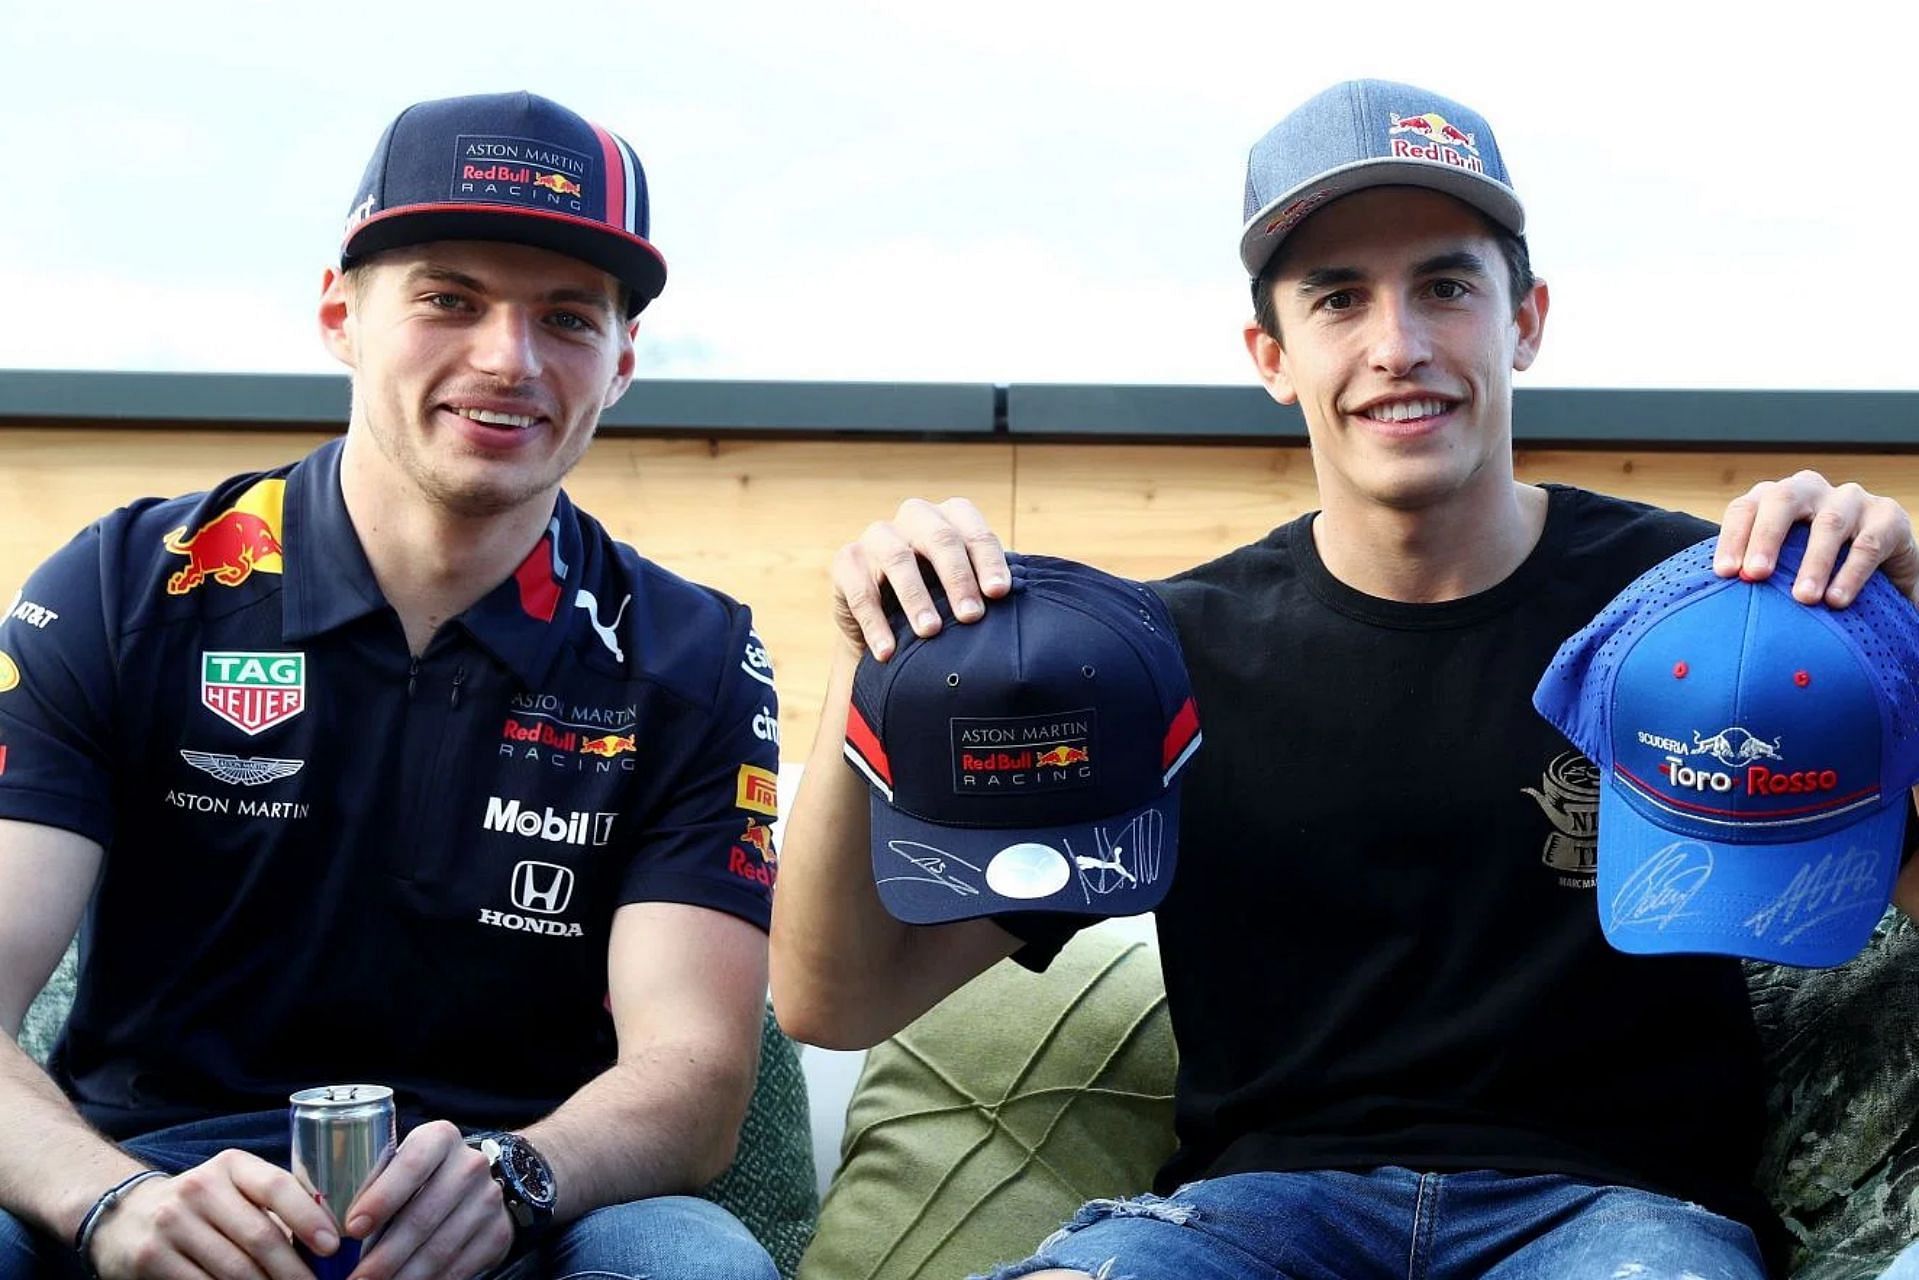 Marc Marquez meets Max Verstappen after practice for the 2019 F1 Spanish Grand Prix. (Photo by Mark Thompson/Getty Images)